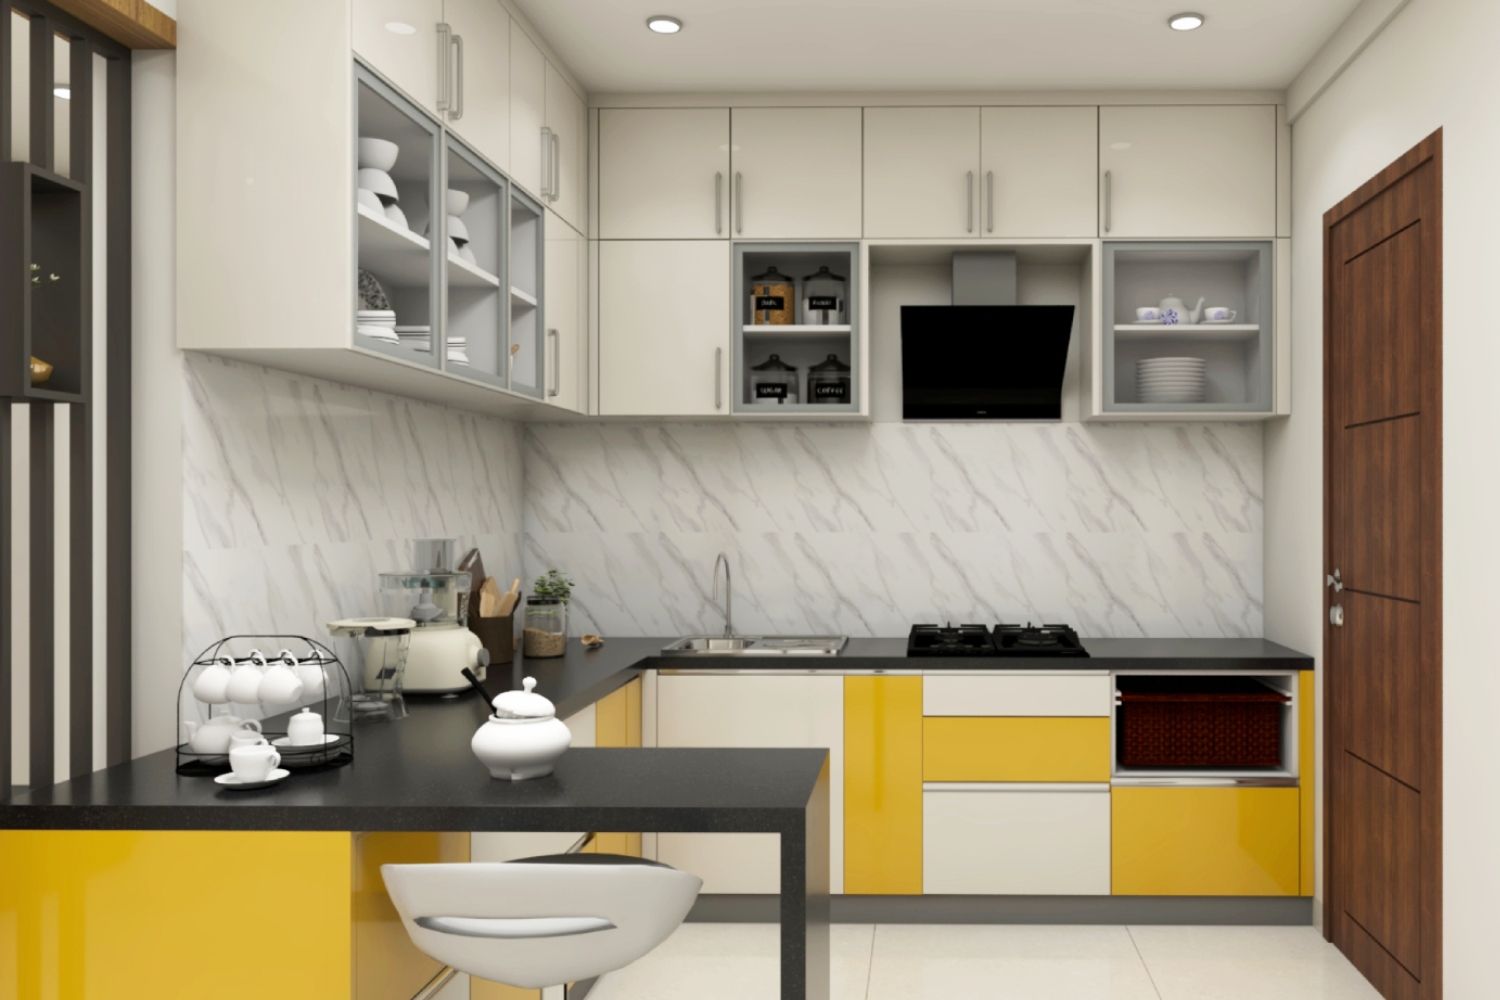 Modern Modular Open Kitchen Design With Champagne Toned And Marigold Yellow Kitchen Cabinets